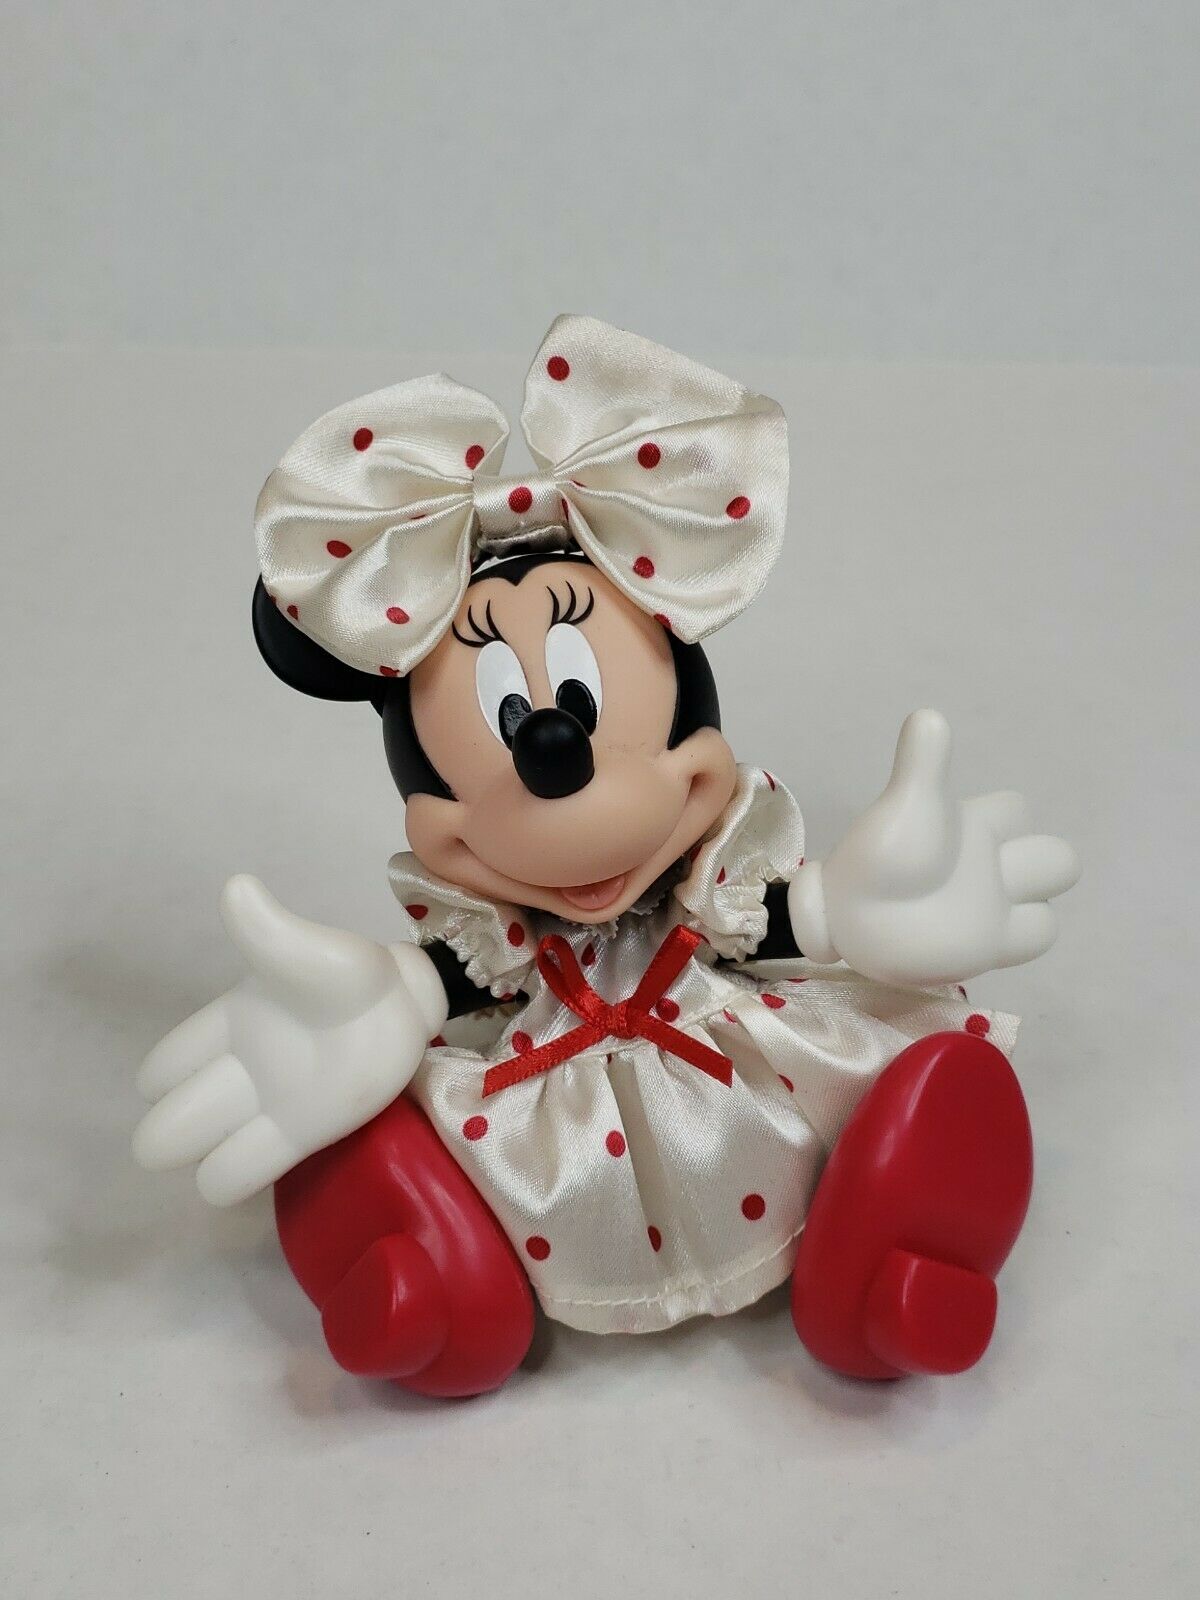 Minnie Mouse 7” Articulated Vinyl Figurine Red Polka Dot Poseable Disney Parks